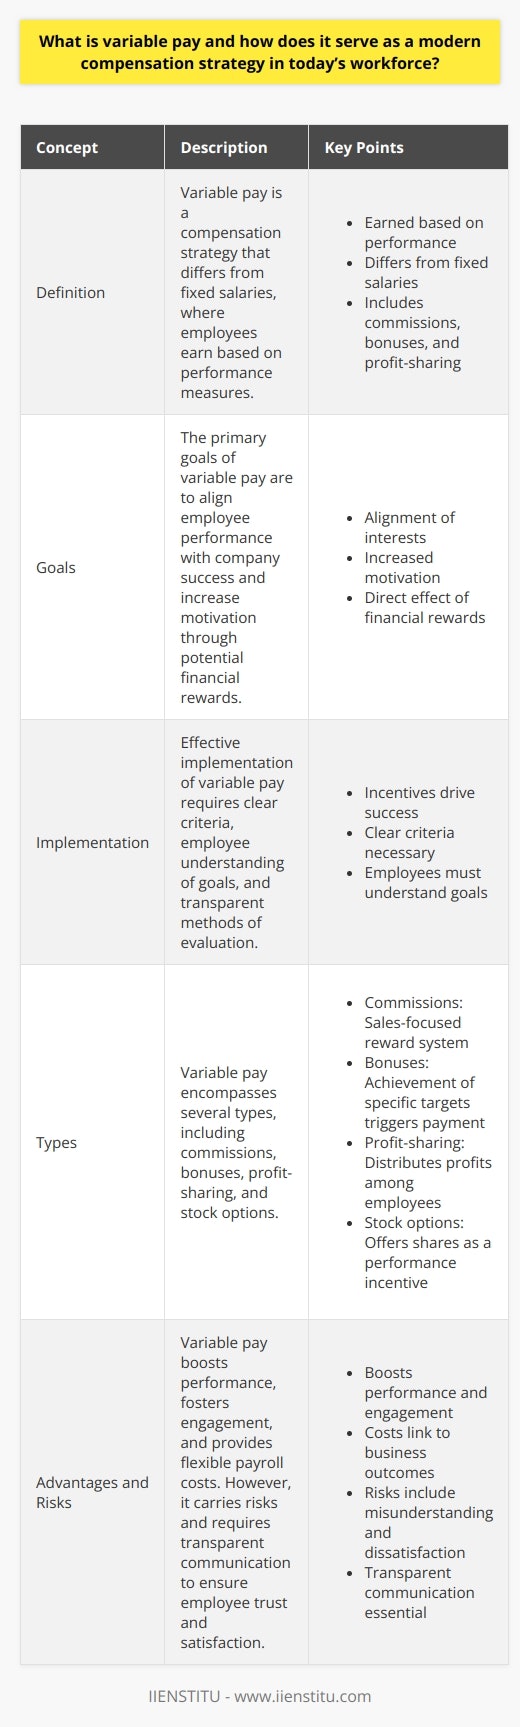 Understanding Variable Pay Variable pay stands out in modern compensation strategies. It differs from fixed salaries. Employees earn it based on performance measures. This can include sales commissions, bonuses, and profit-sharing.  Goals of Variable Pay Alignment of interests  forms a core goal. It aligns employee performance with company success. Motivation often increases—a direct effect of potential financial rewards.  Variable Pay Implementation Incentives  drive the models success. To implement it effectively, clear criteria are necessary. Employees must understand the goals. Equally important are the methods of evaluation. Types of Variable Pay Several types exist. Examples include: -  Commissions : Sales-focused reward system. -  Bonuses : Achievement of specific targets triggers payment. -  Profit-sharing : Distributes profits among employees. -  Stock options : Offers shares as a performance incentive. Advantages of Variable Pay It boosts performance. It also fosters a more engaged workforce. Costs link directly to business outcomes. Hence, it provides a flexible payroll cost. Risks and Considerations It carries risks. Transparent communication is essential. Employees need to trust the systems fairness. Misunderstanding may lead to dissatisfaction.  Variable Pay as a Retention Tool It can serve as a powerful retention tool. Employees see the potential for personal growth. They feel their contributions matter.  Conclusion Variable pay shapes modern workforce dynamics. It enables businesses to adapt. It rewards high performers. It aligns with todays drive for results-oriented labor practices.